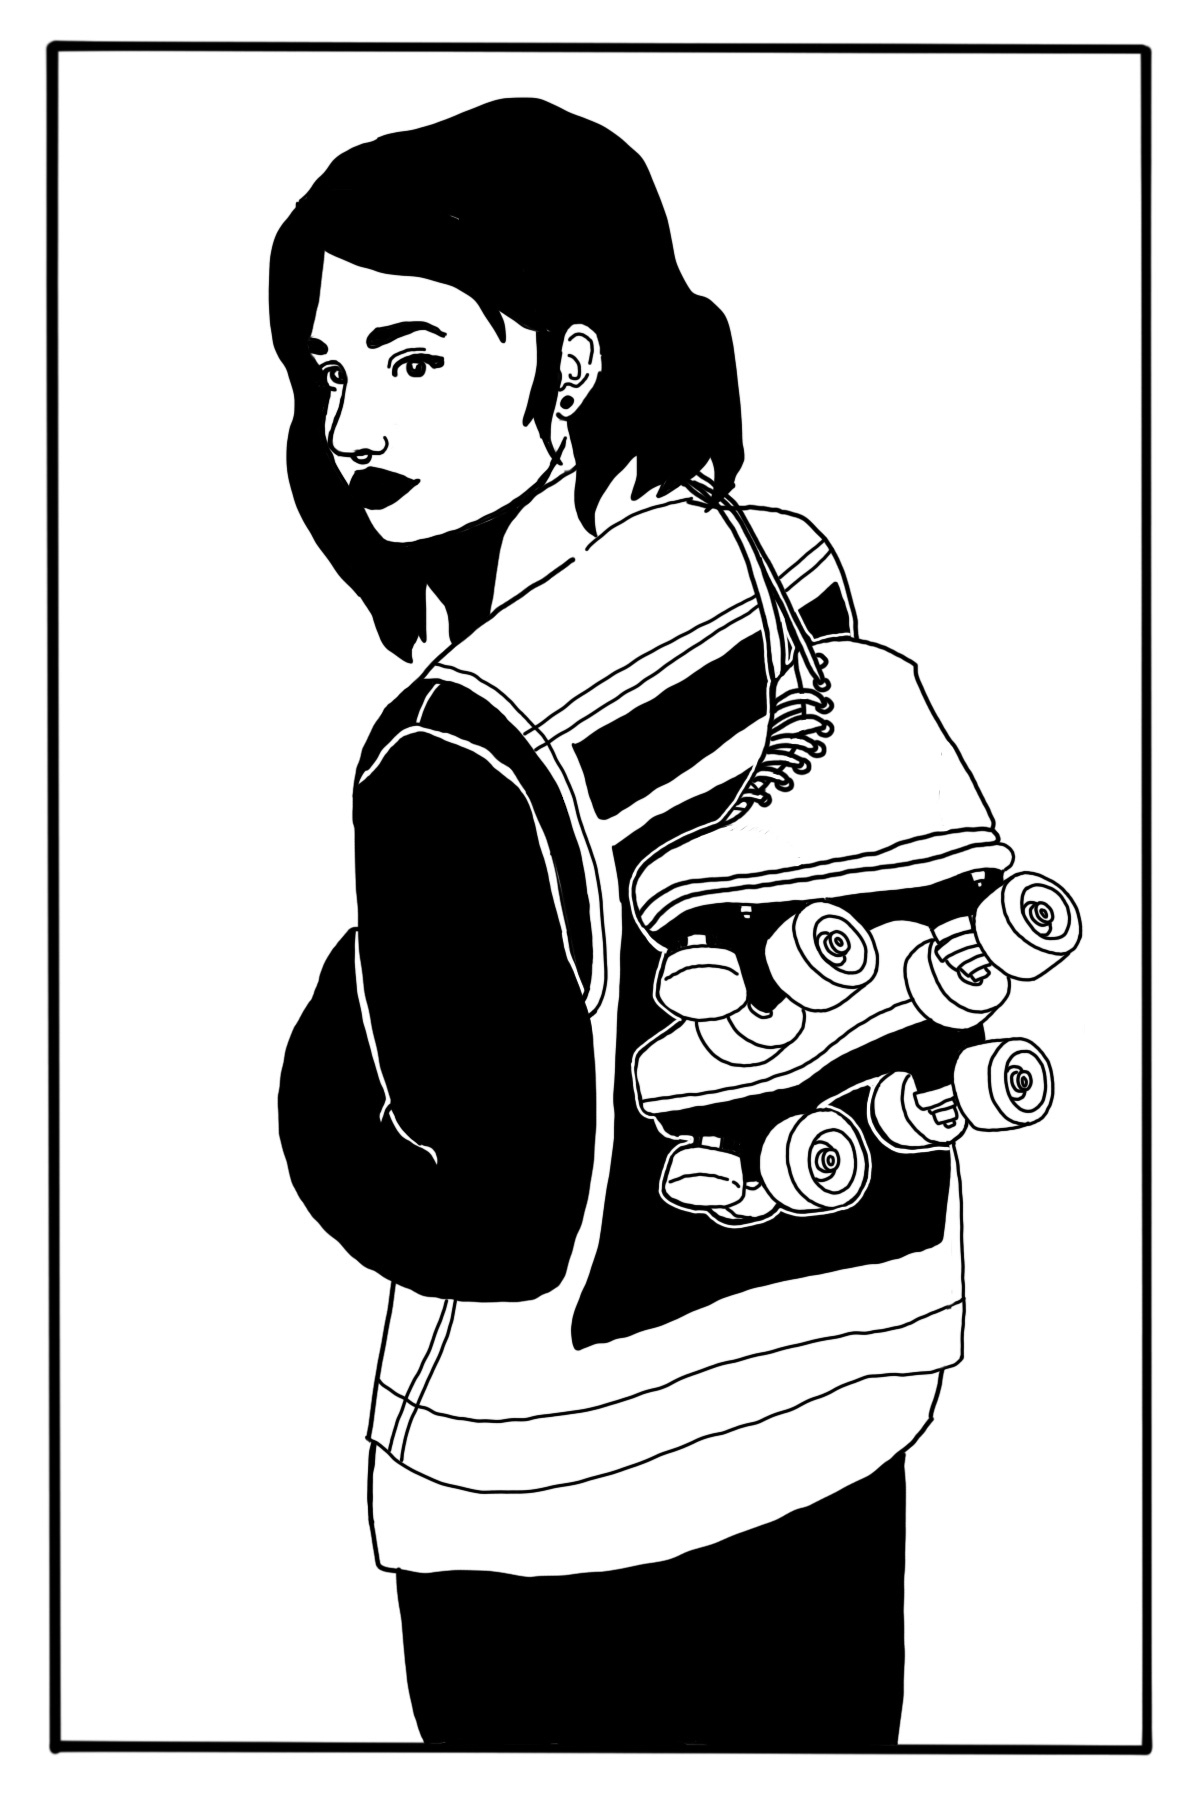 Illustration of a woman carrying a set of roller skates